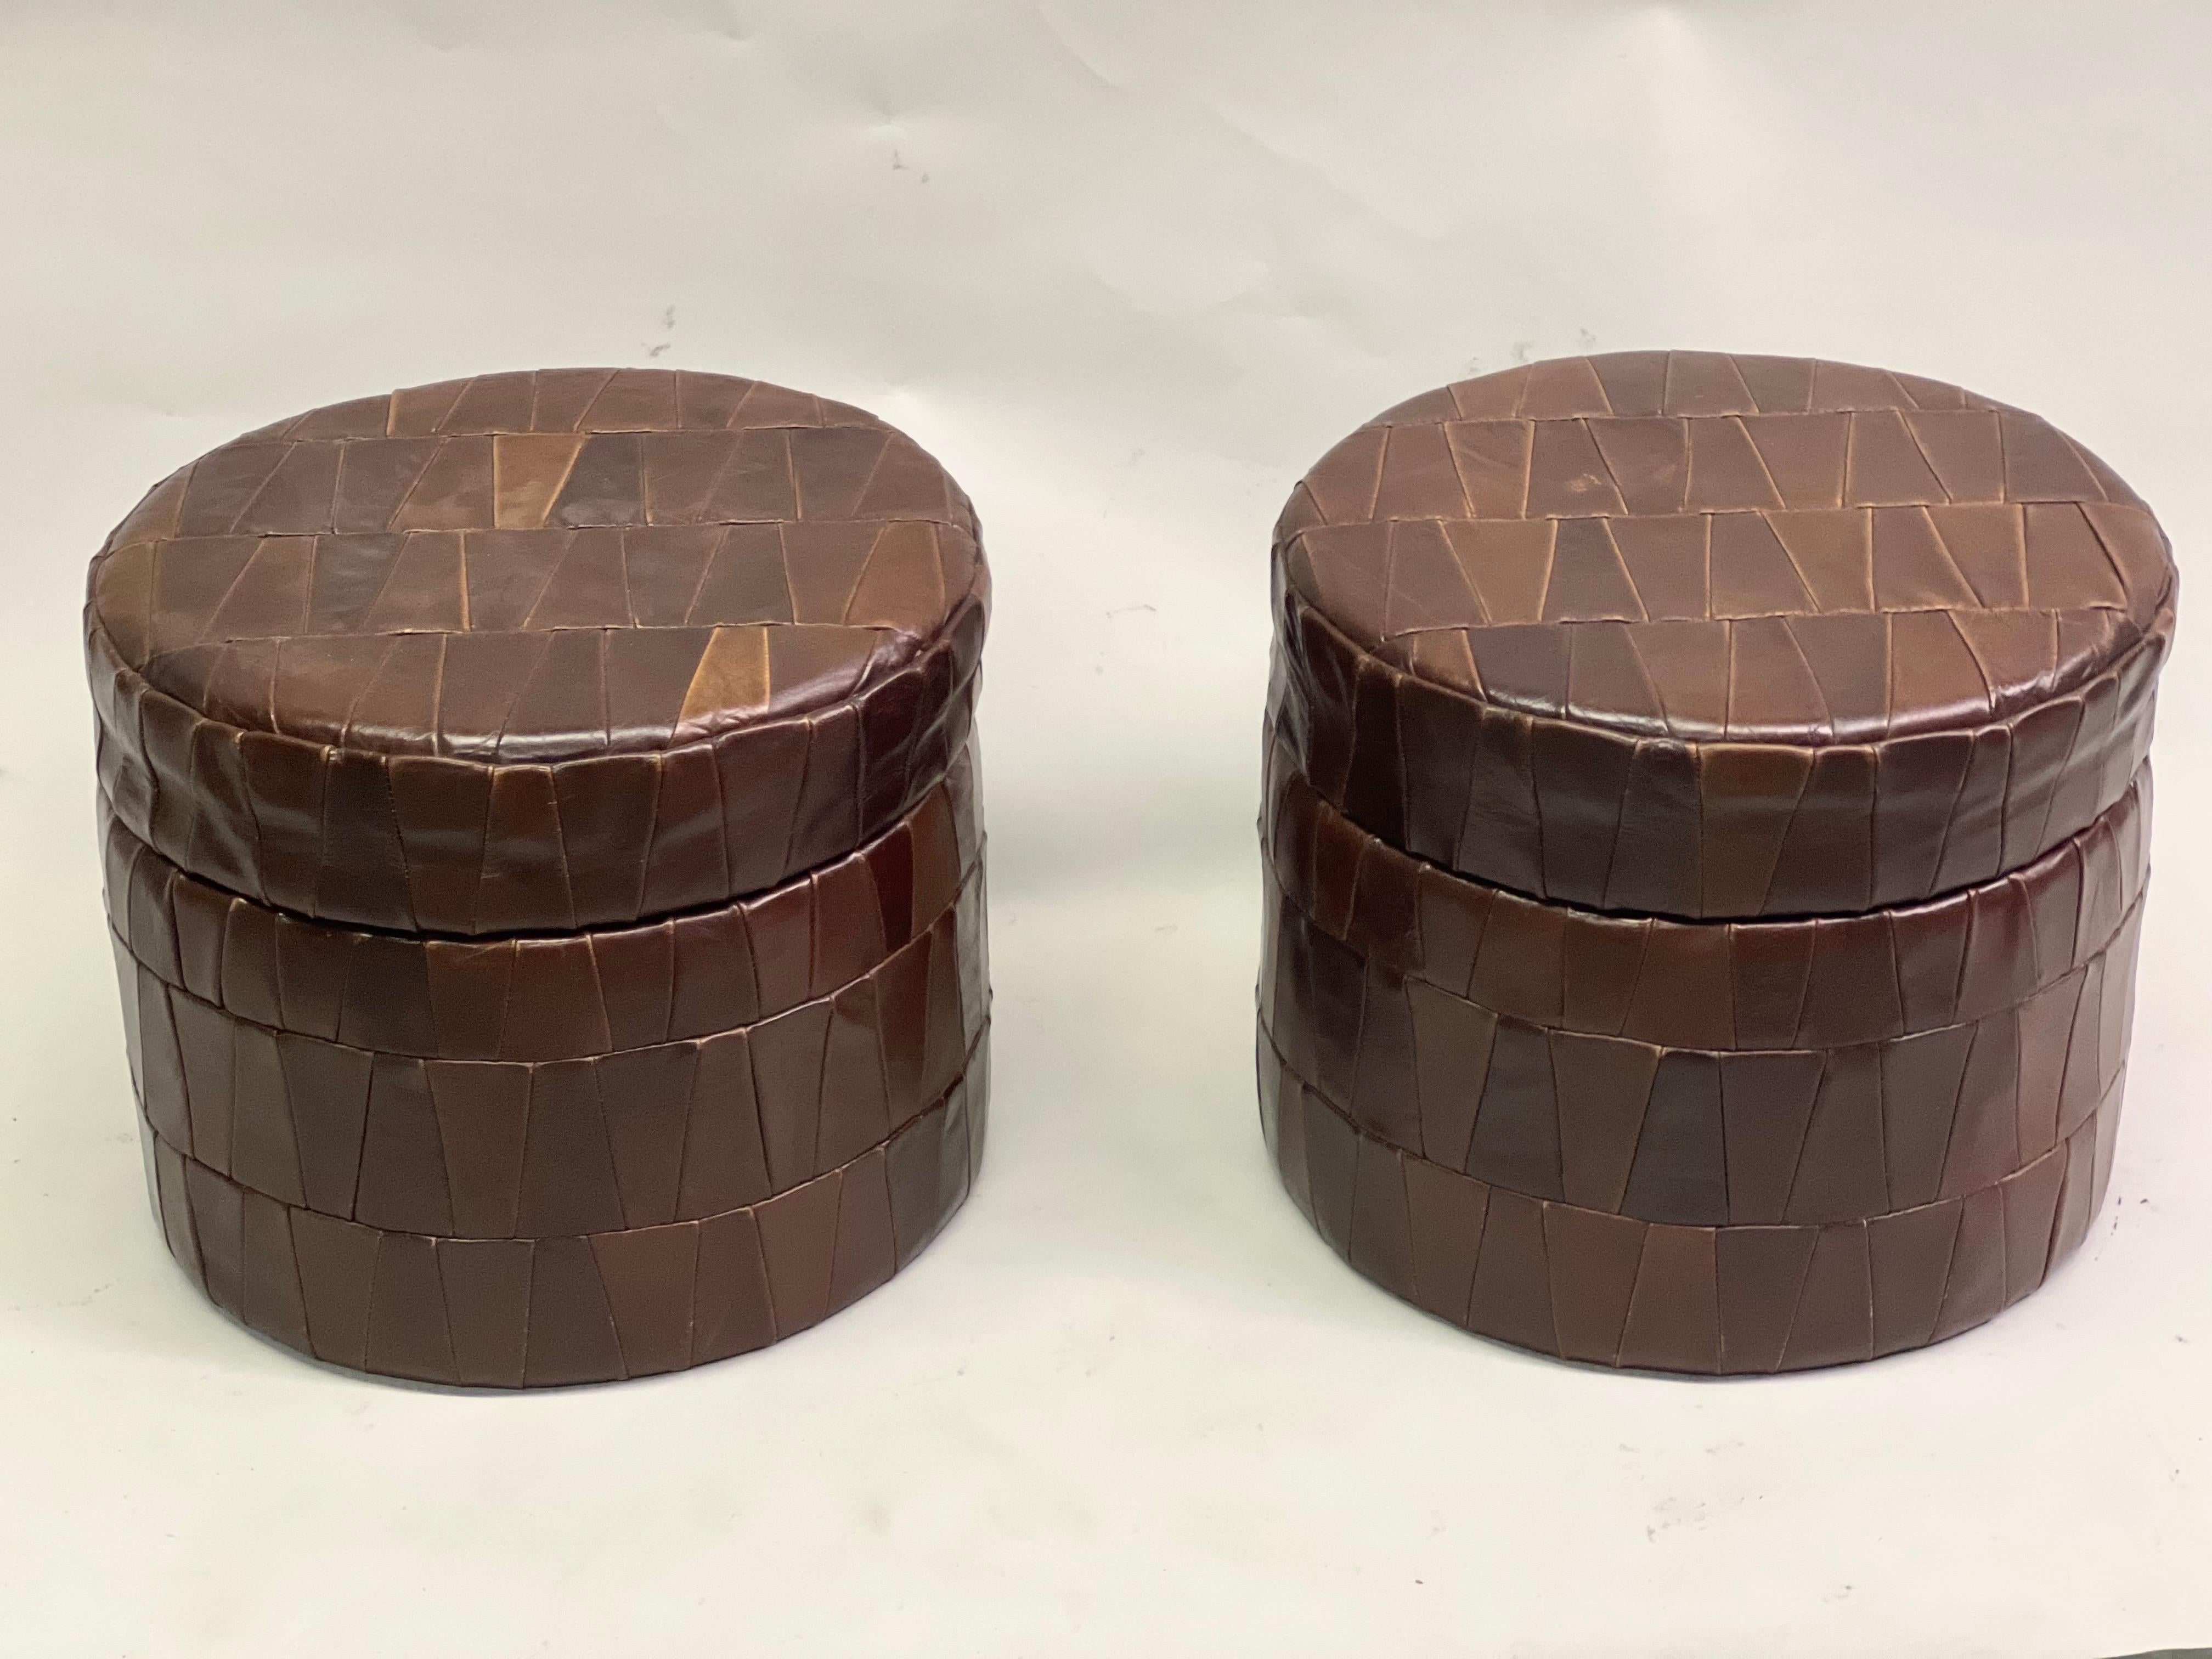 Pair of Finely Crafted Swiss Mid-Century Modern Ottomans / Poufs / Stools / Benches by De Sede, Switzerland circa 1960. This matched pair is round / circular and features De Sede's iconic stitching and patchwork design. Each piece opens to reveal a